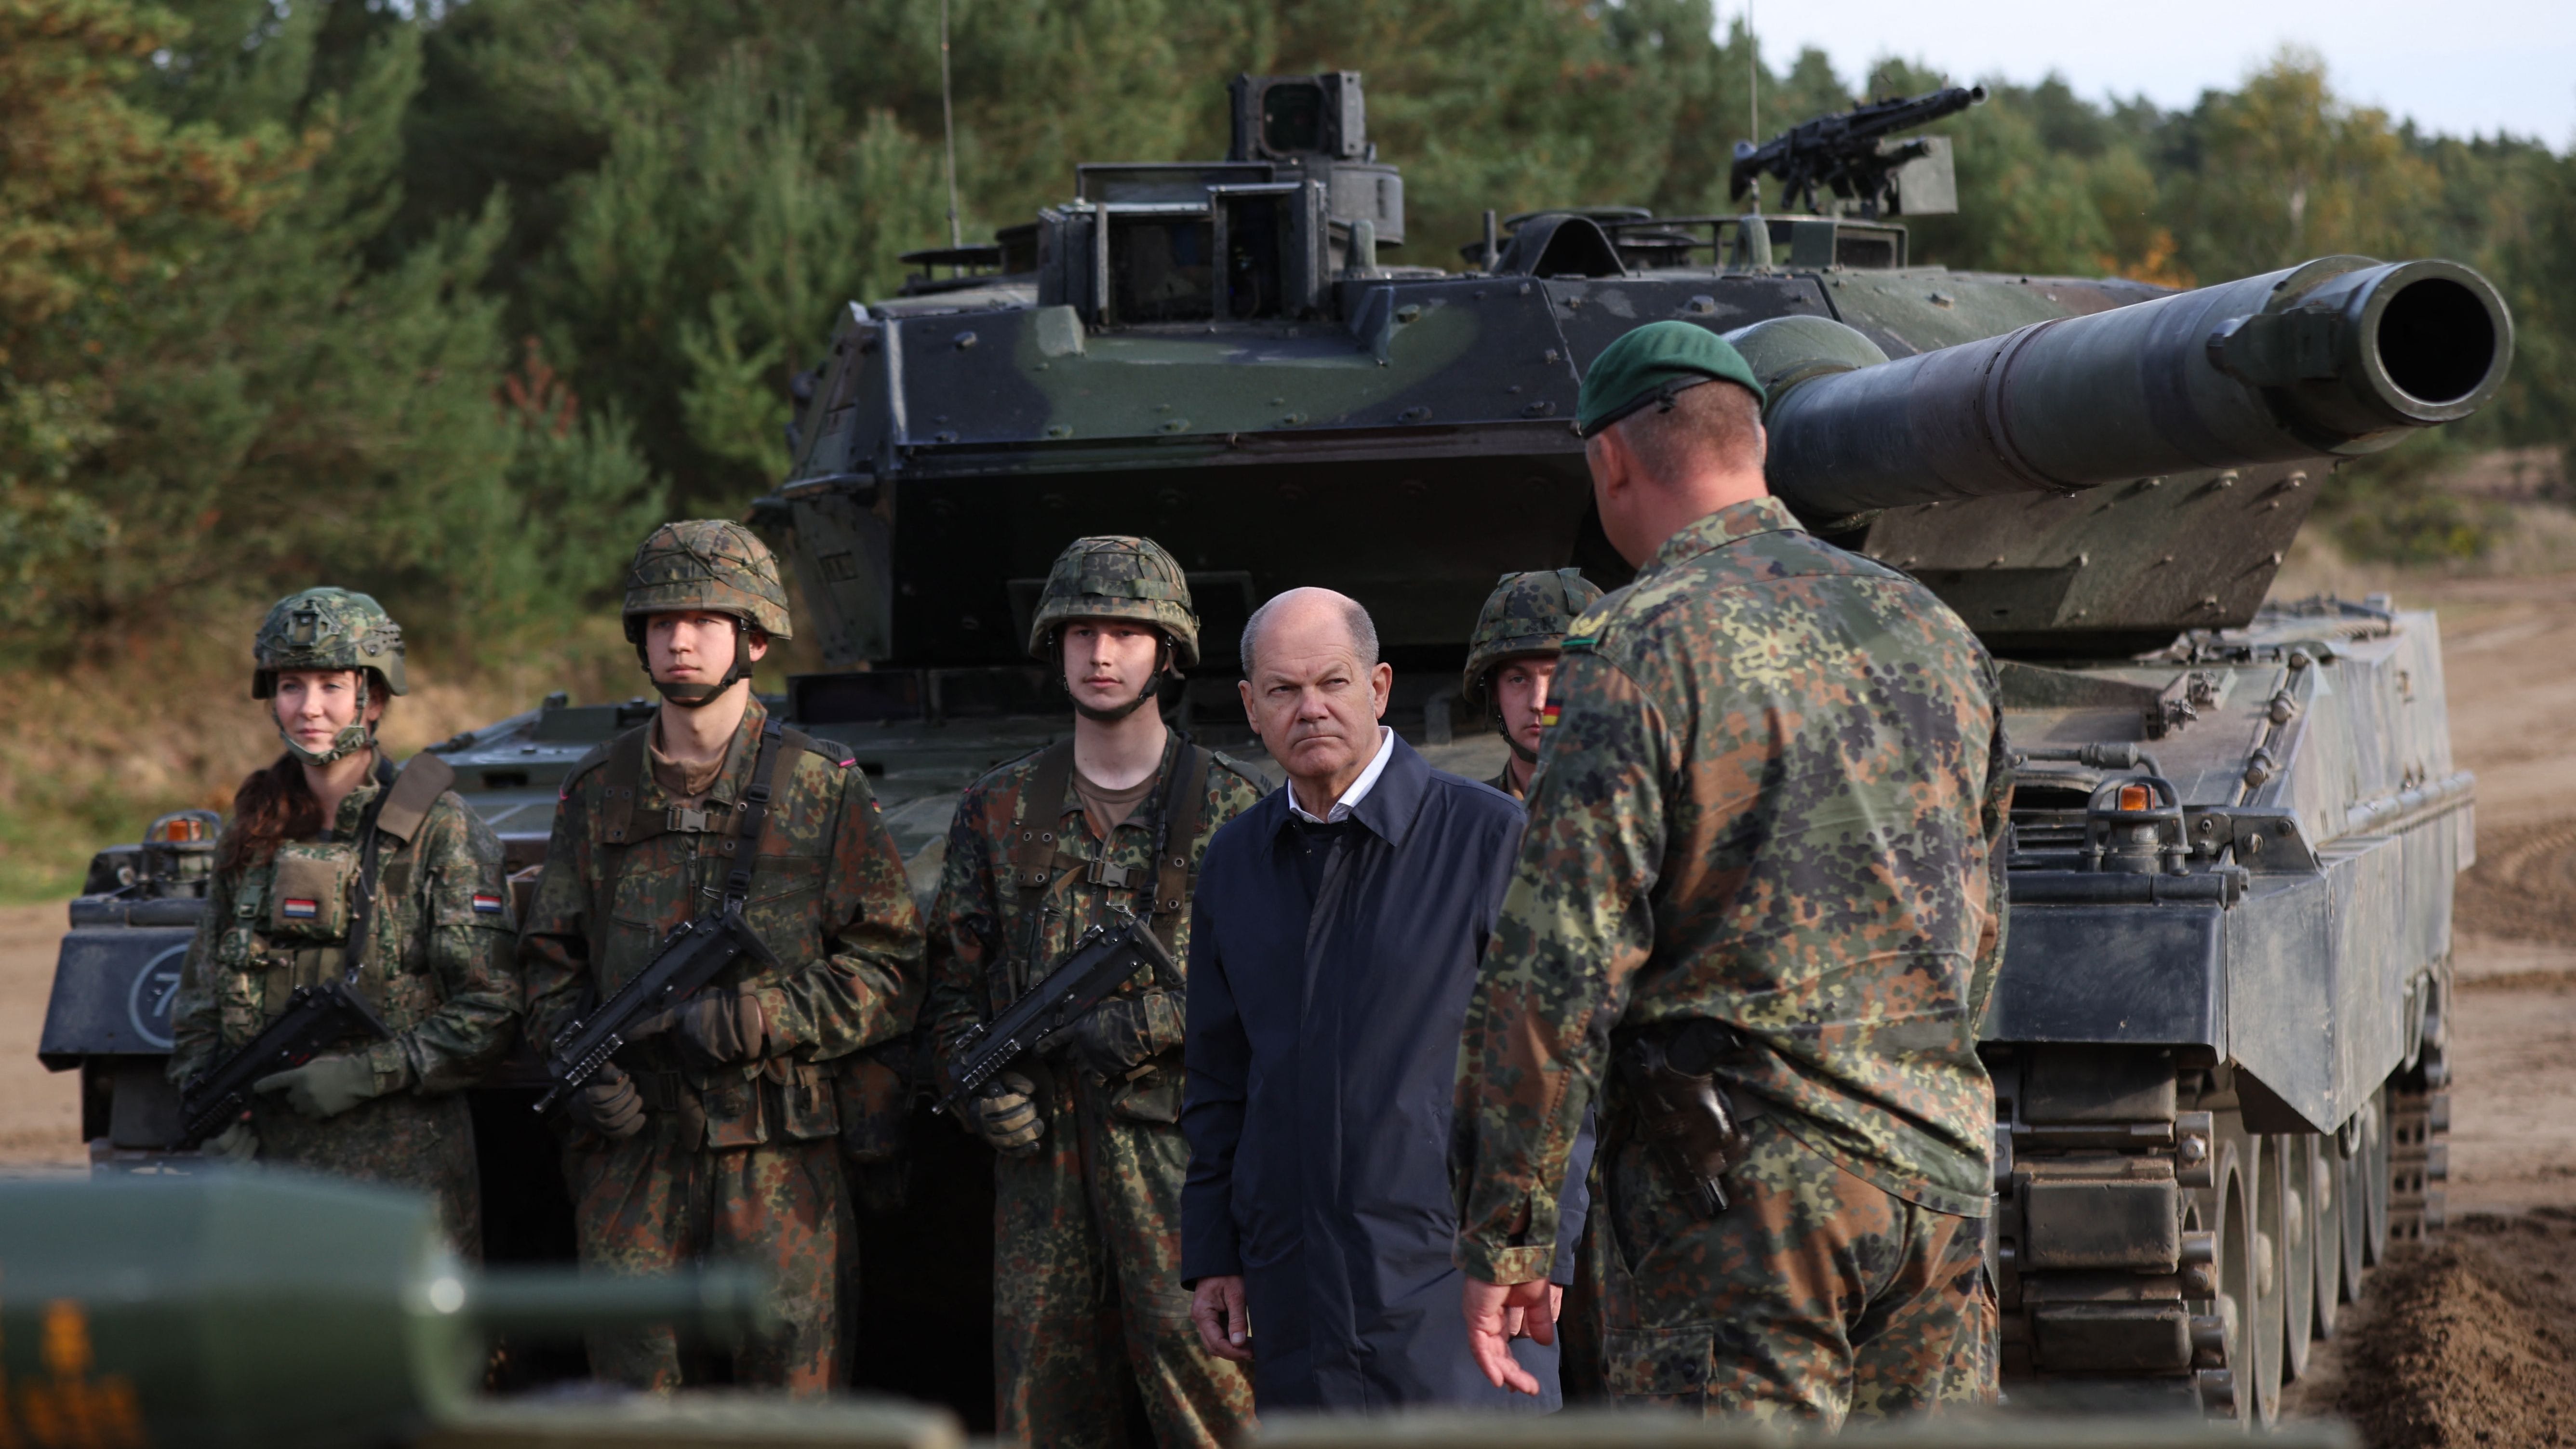 On October 17, 2022 shows German Chancellor Olaf Scholz (C) talking with soldiers in front of a Leopard 2 main battle tank during a training exercise at the military ground in Ostenholz, northern Germany.